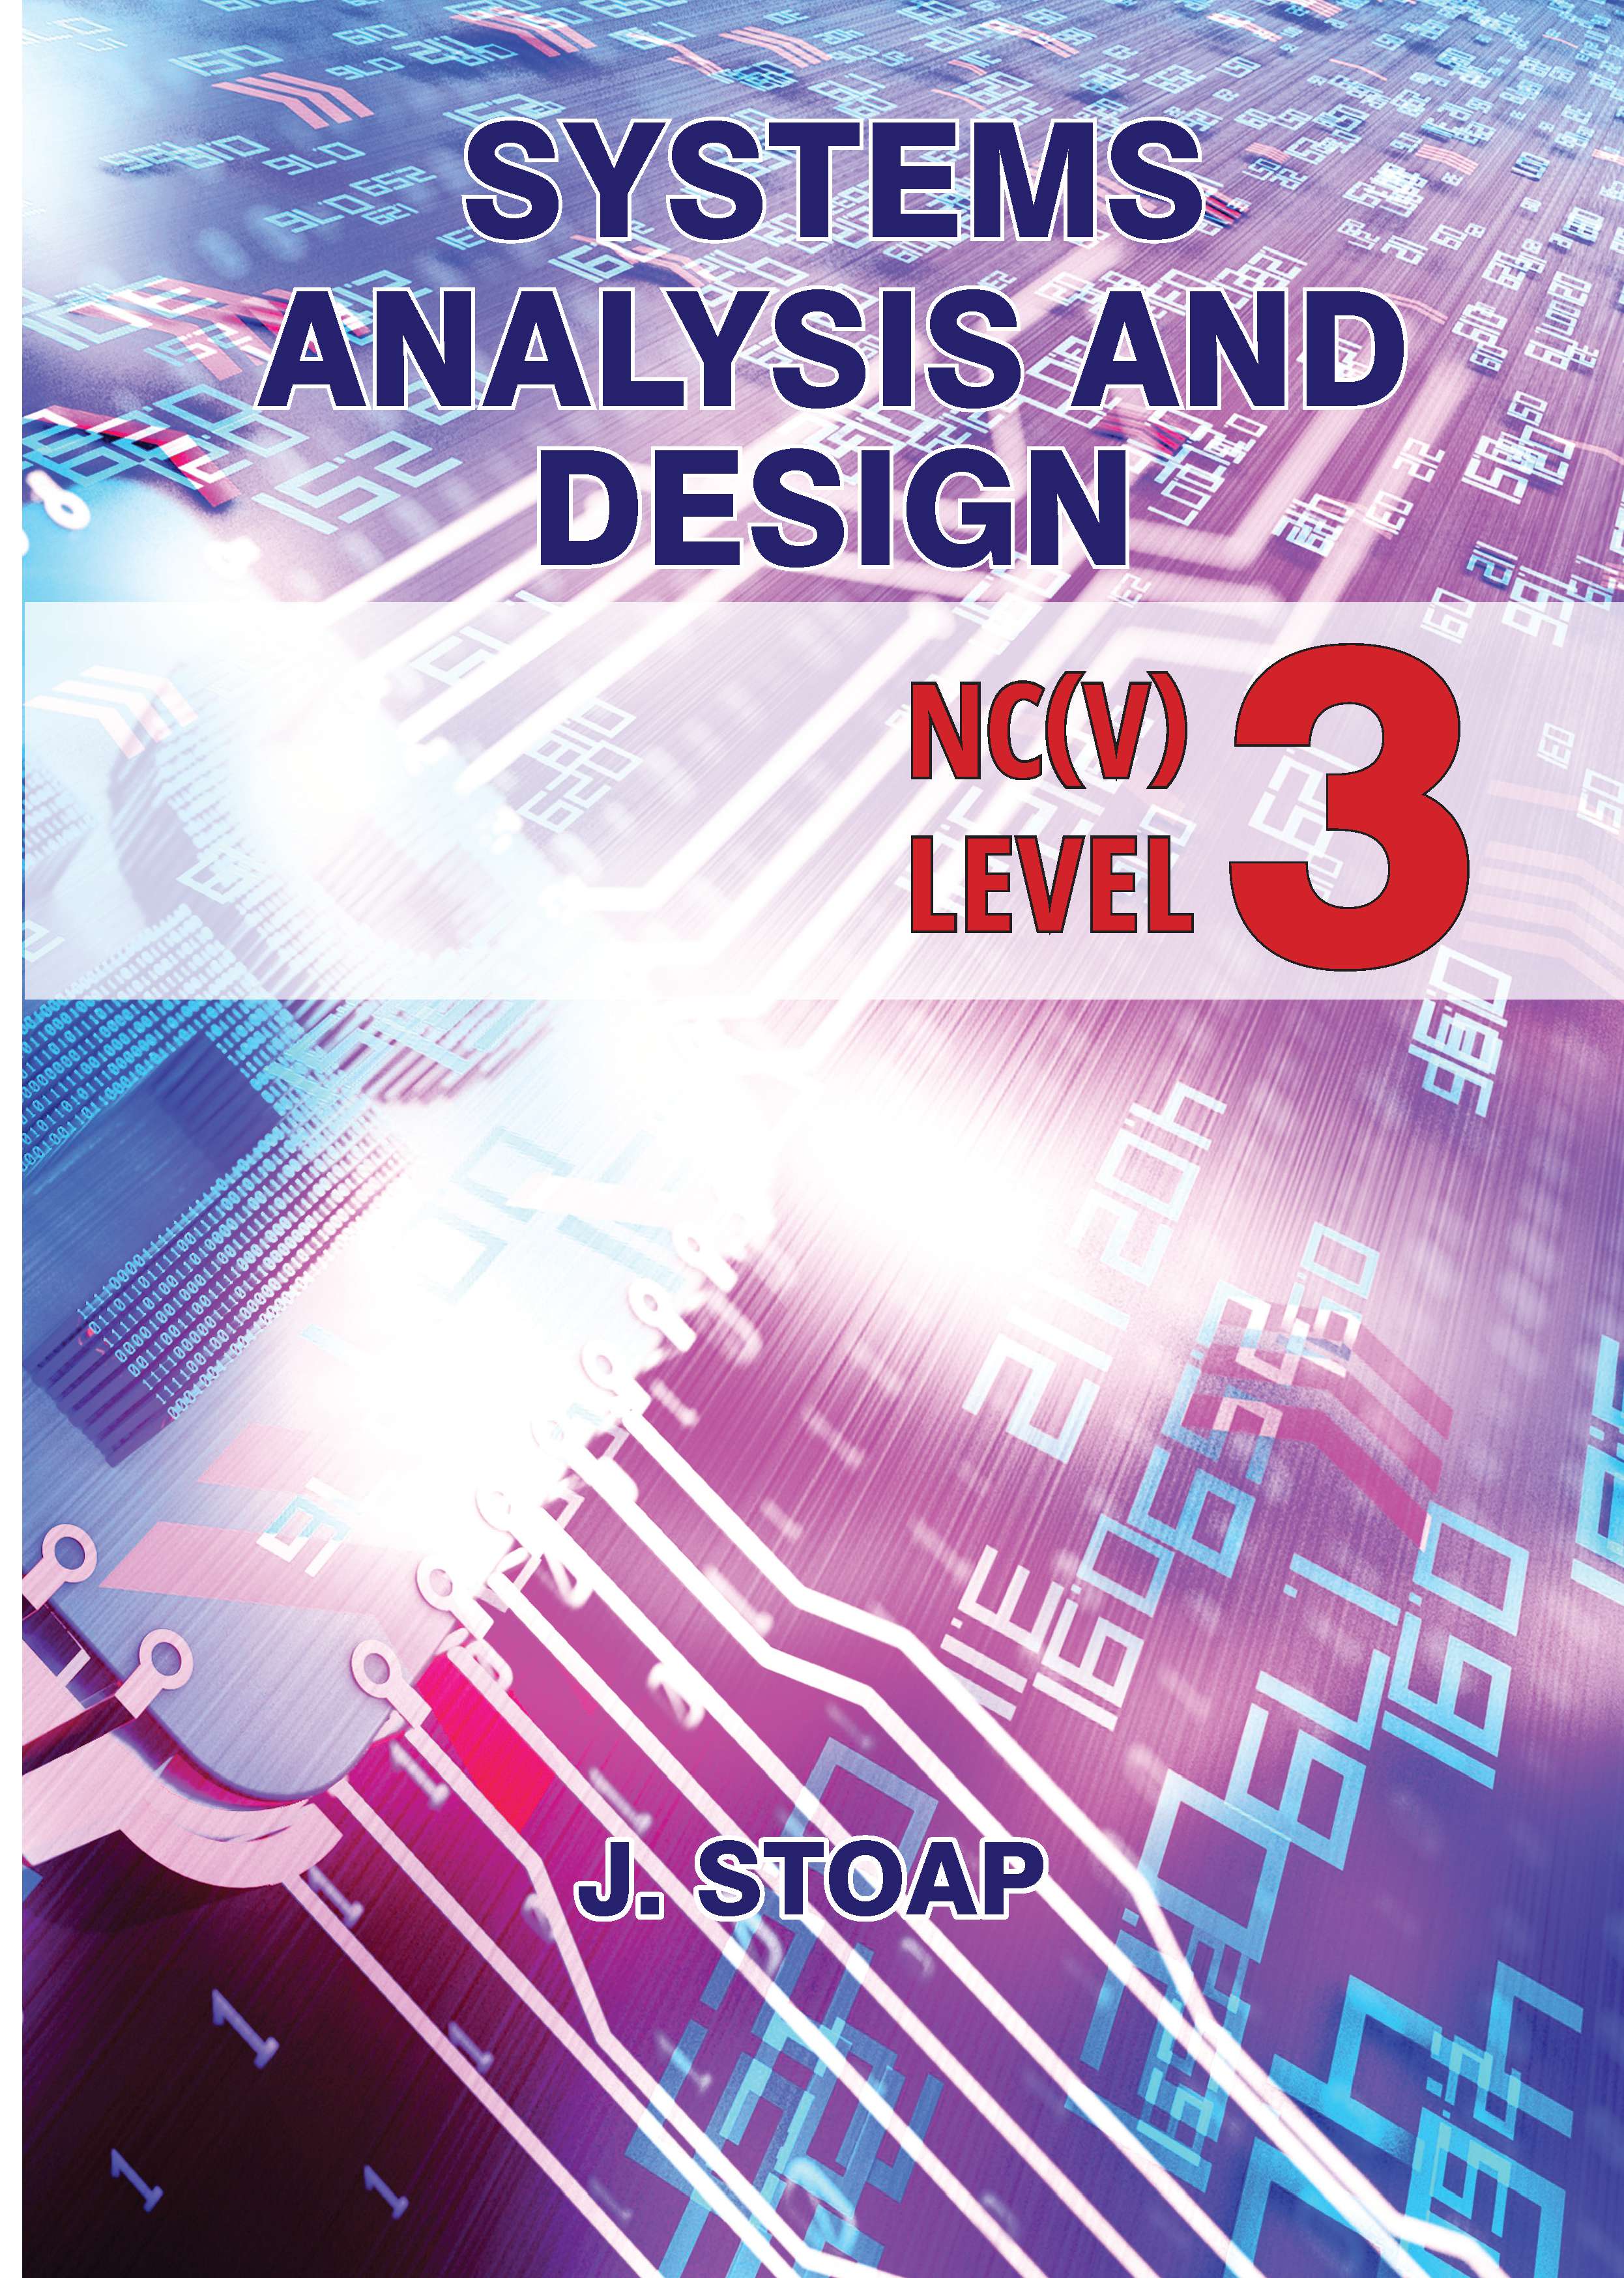 SHUTERS SYSTEMS ANALYSIS AND DESIGN NC(V) LEVEL 3 STUDENT TEXTBOOK Cover